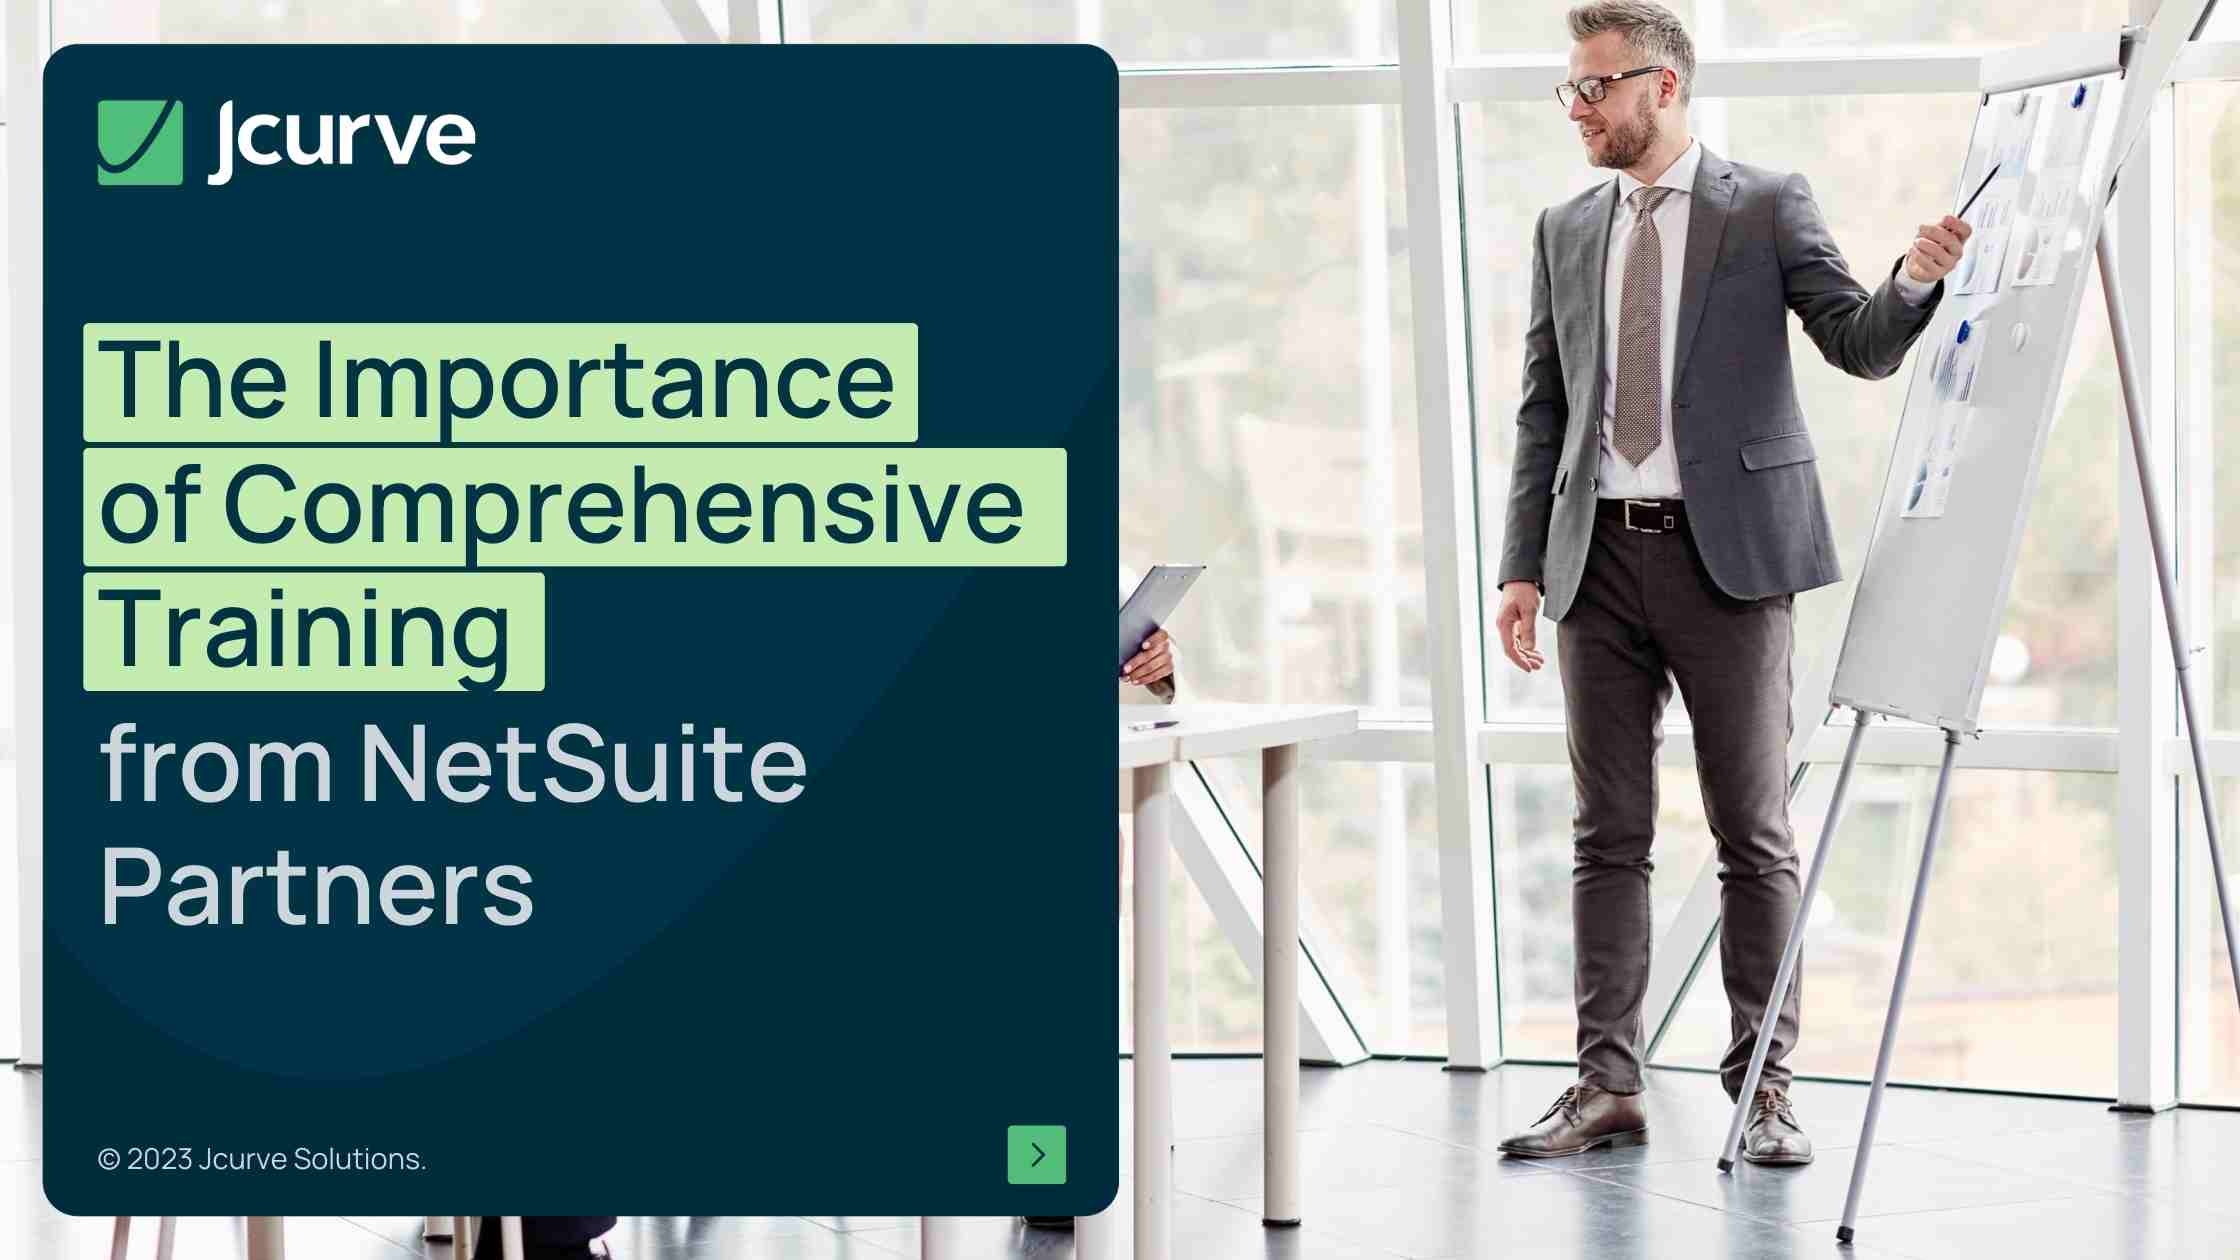 The Importance of Comprehensive Training from NetSuite Partners